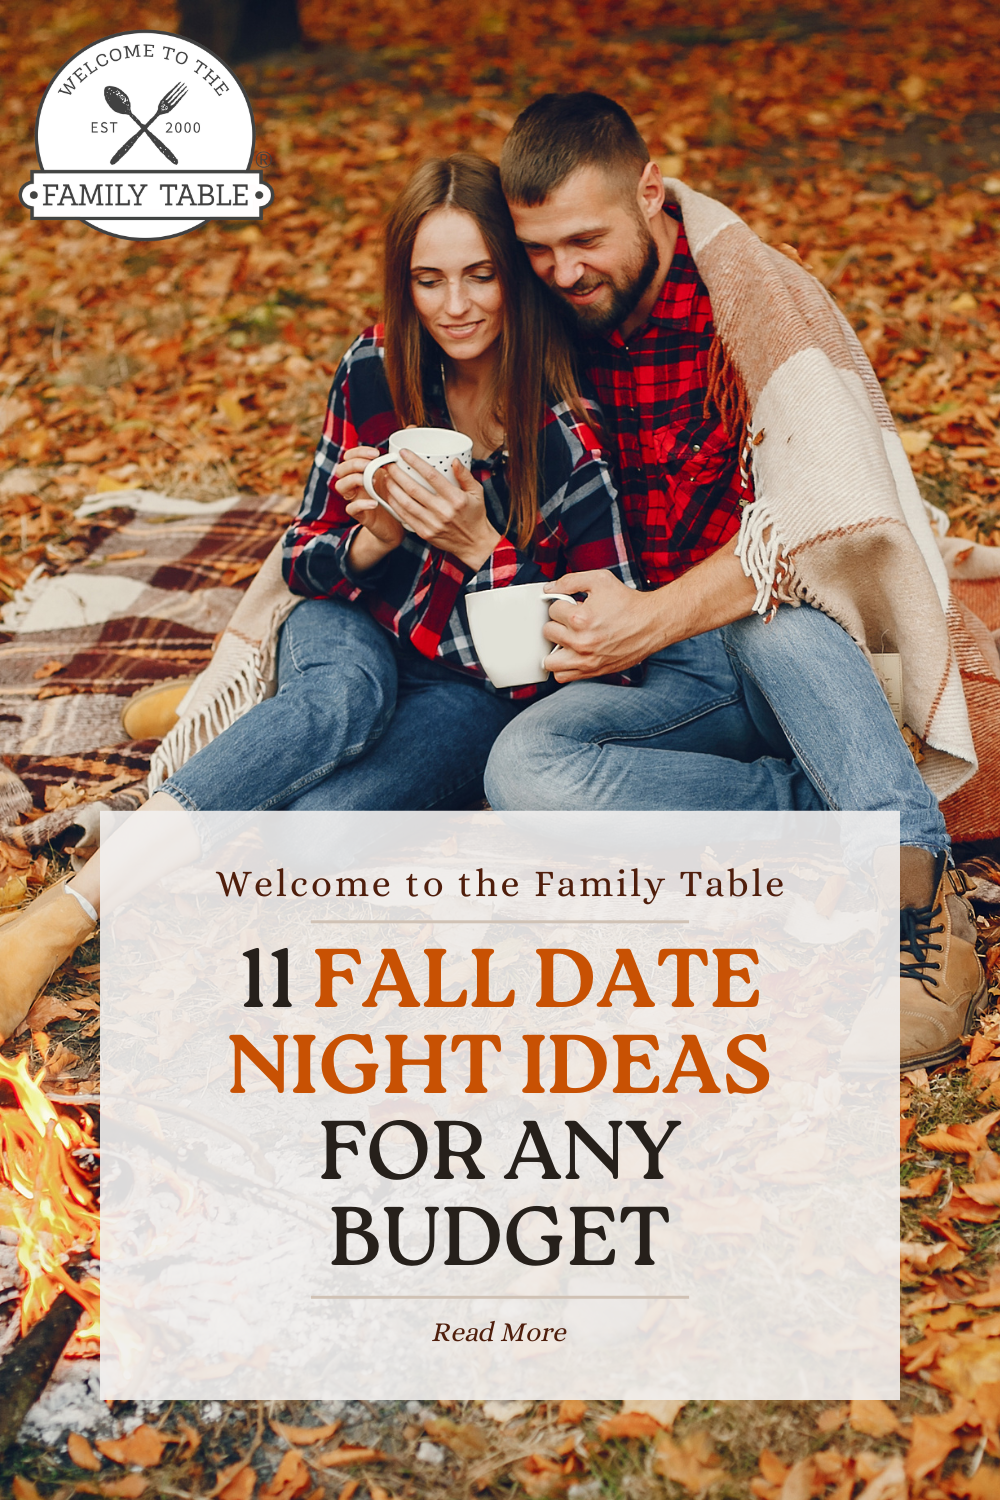 11 Fall Date Night Ideas for Any Budget